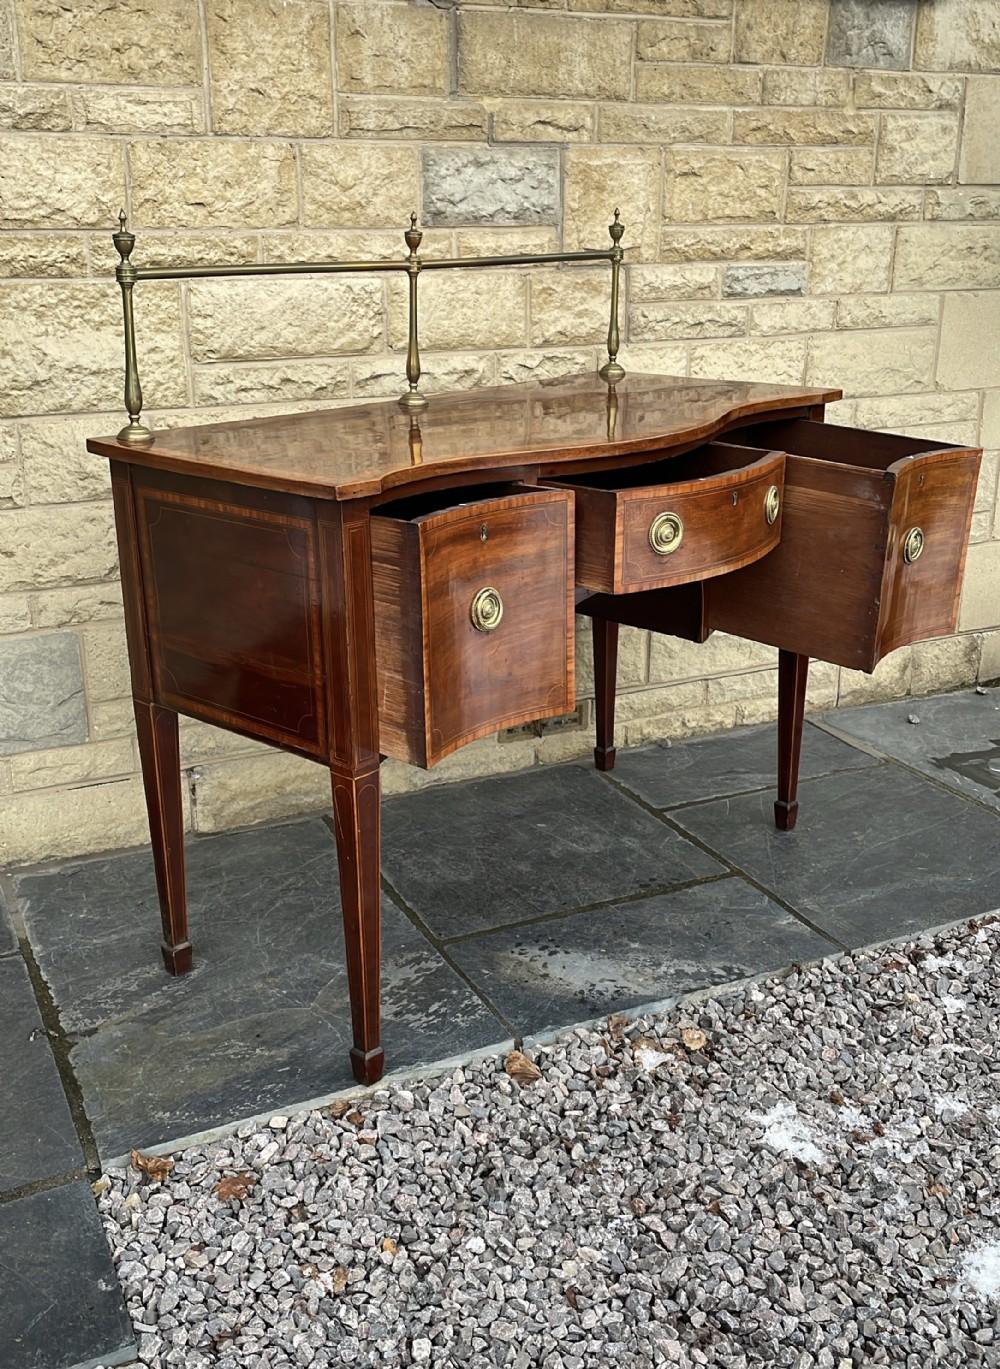  Early 19th C. English Inlaid Figured Mahogany Hepp. Style Serpentine Sideboard For Sale 11